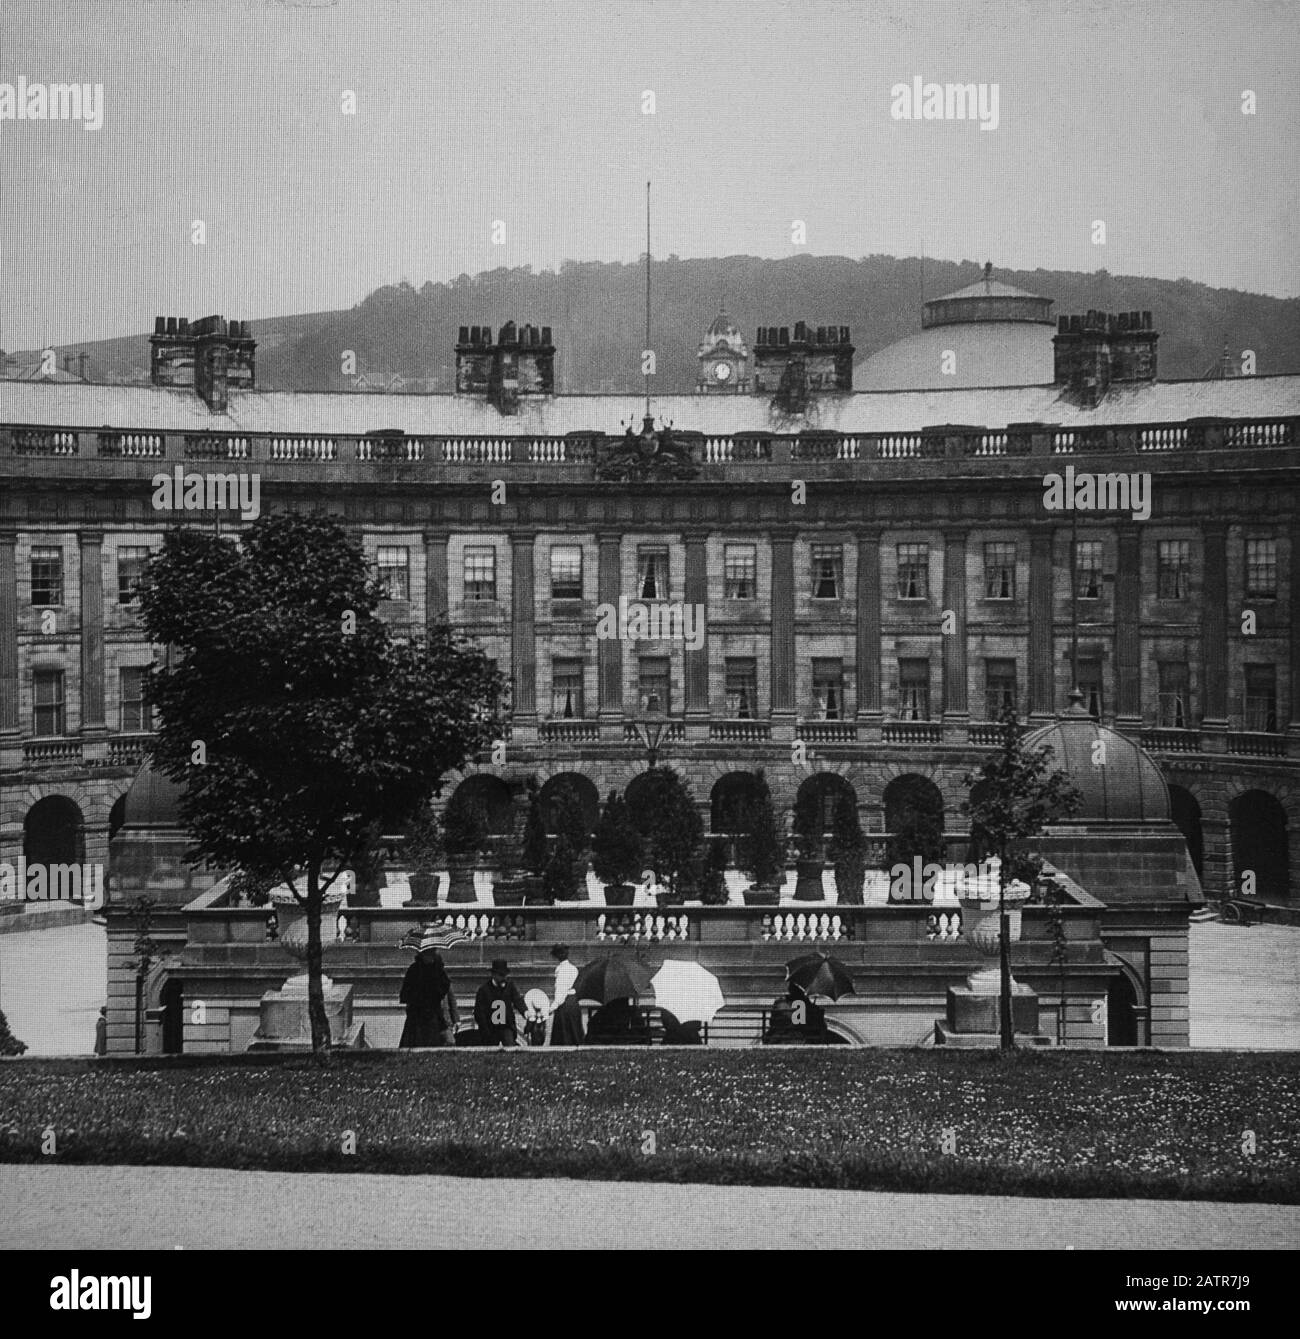 Buxton Crescent & Thermal Spa Hotel during the Victorian period c1890, Victorians in front of the Bath House, antique old glass magic lantern slide picture. The newly renovated hotel is due to open in 2020 creating a northern capital for health and wellbeing. Antique Magic Lantern Slide.  Original photographer unknown, copyright period expired.  Digital photography, restoration, editing copyright © Doug Blane. Stock Photo